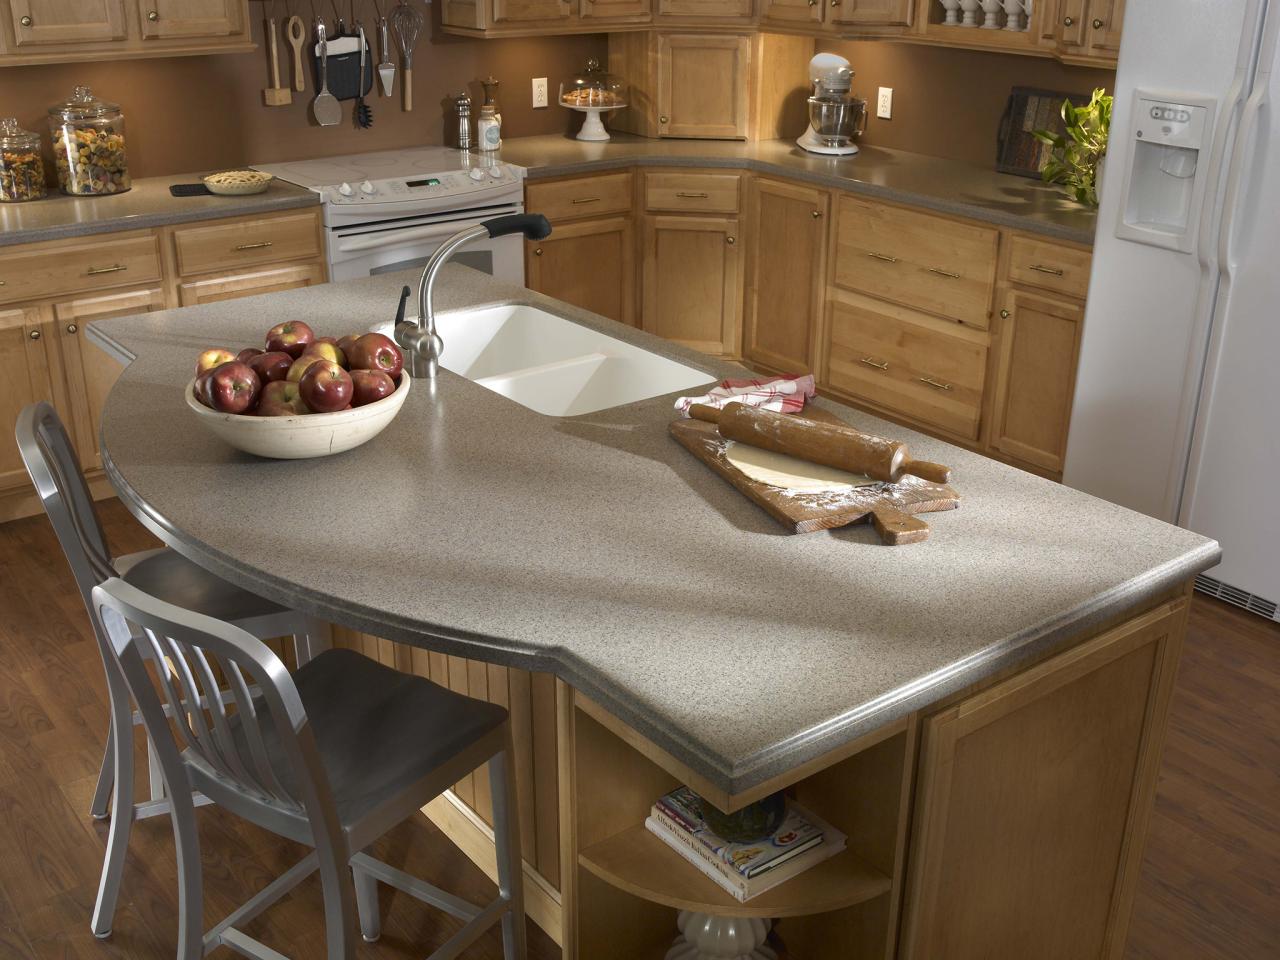 Solid Surface Countertops For The, Why Solid Surface Countertops